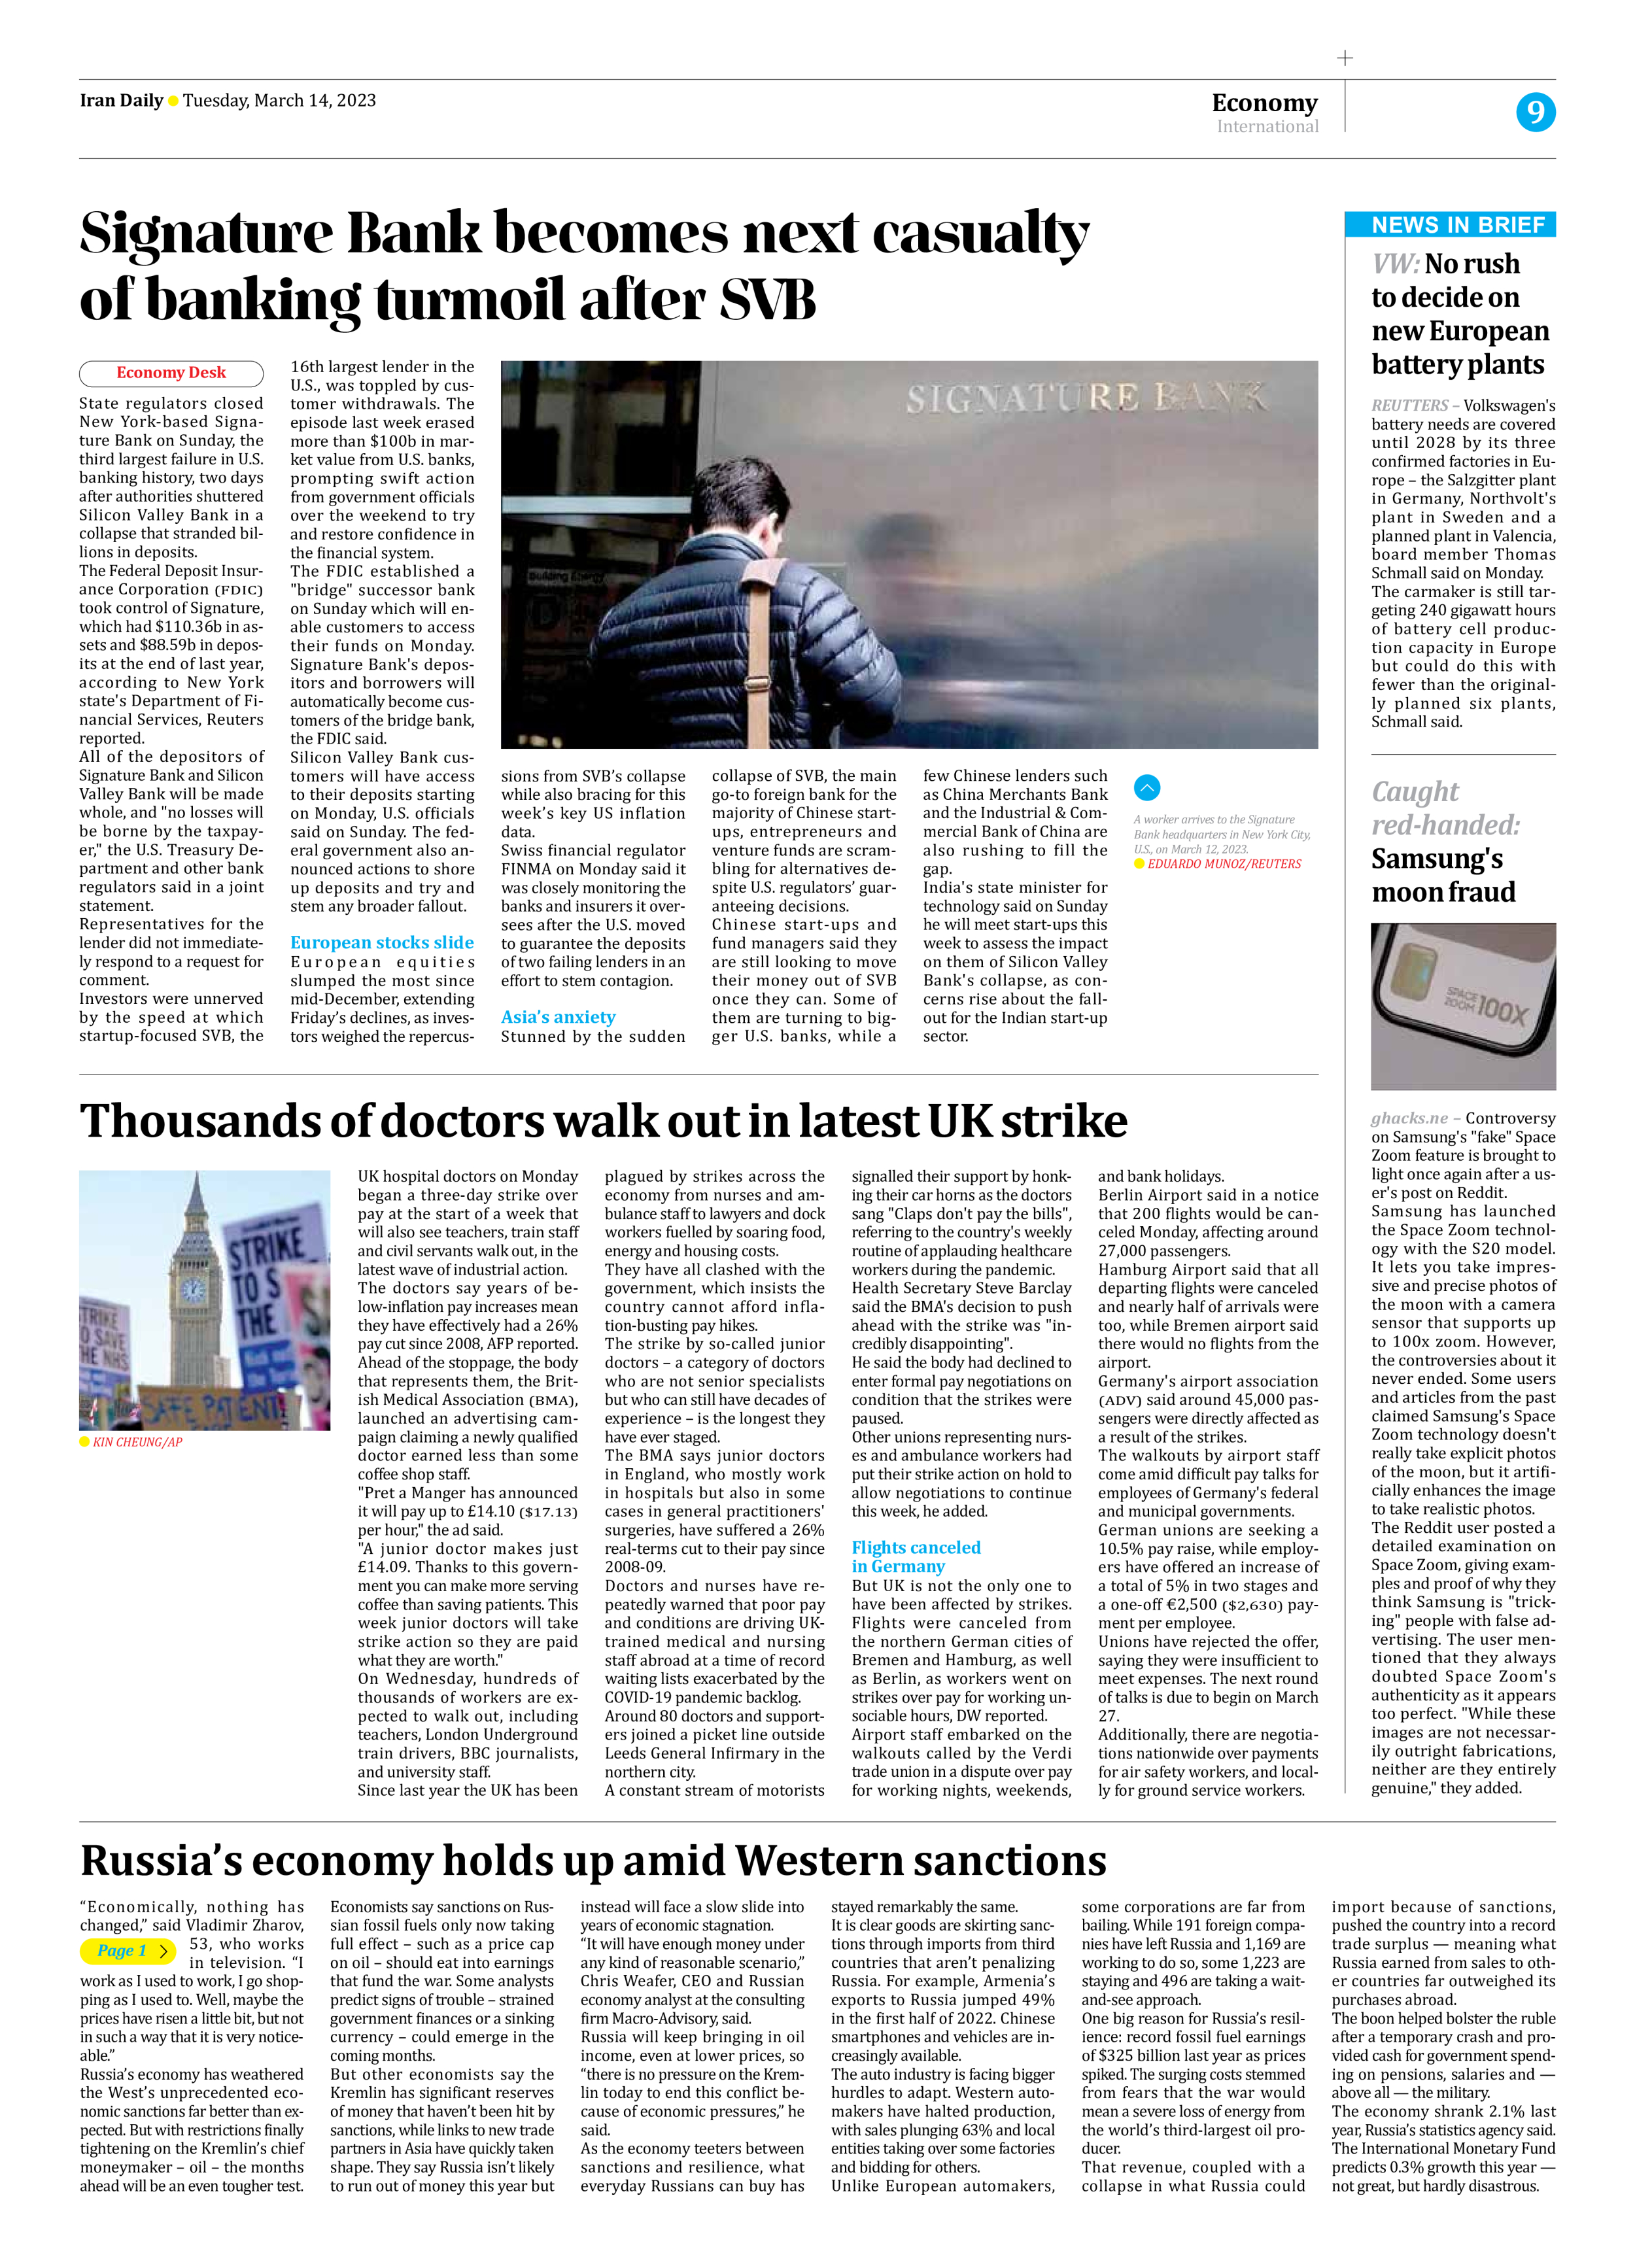 Iran Daily - Number Seven Thousand Two Hundred and Fifty Seven - 14 March 2023 - Page 9